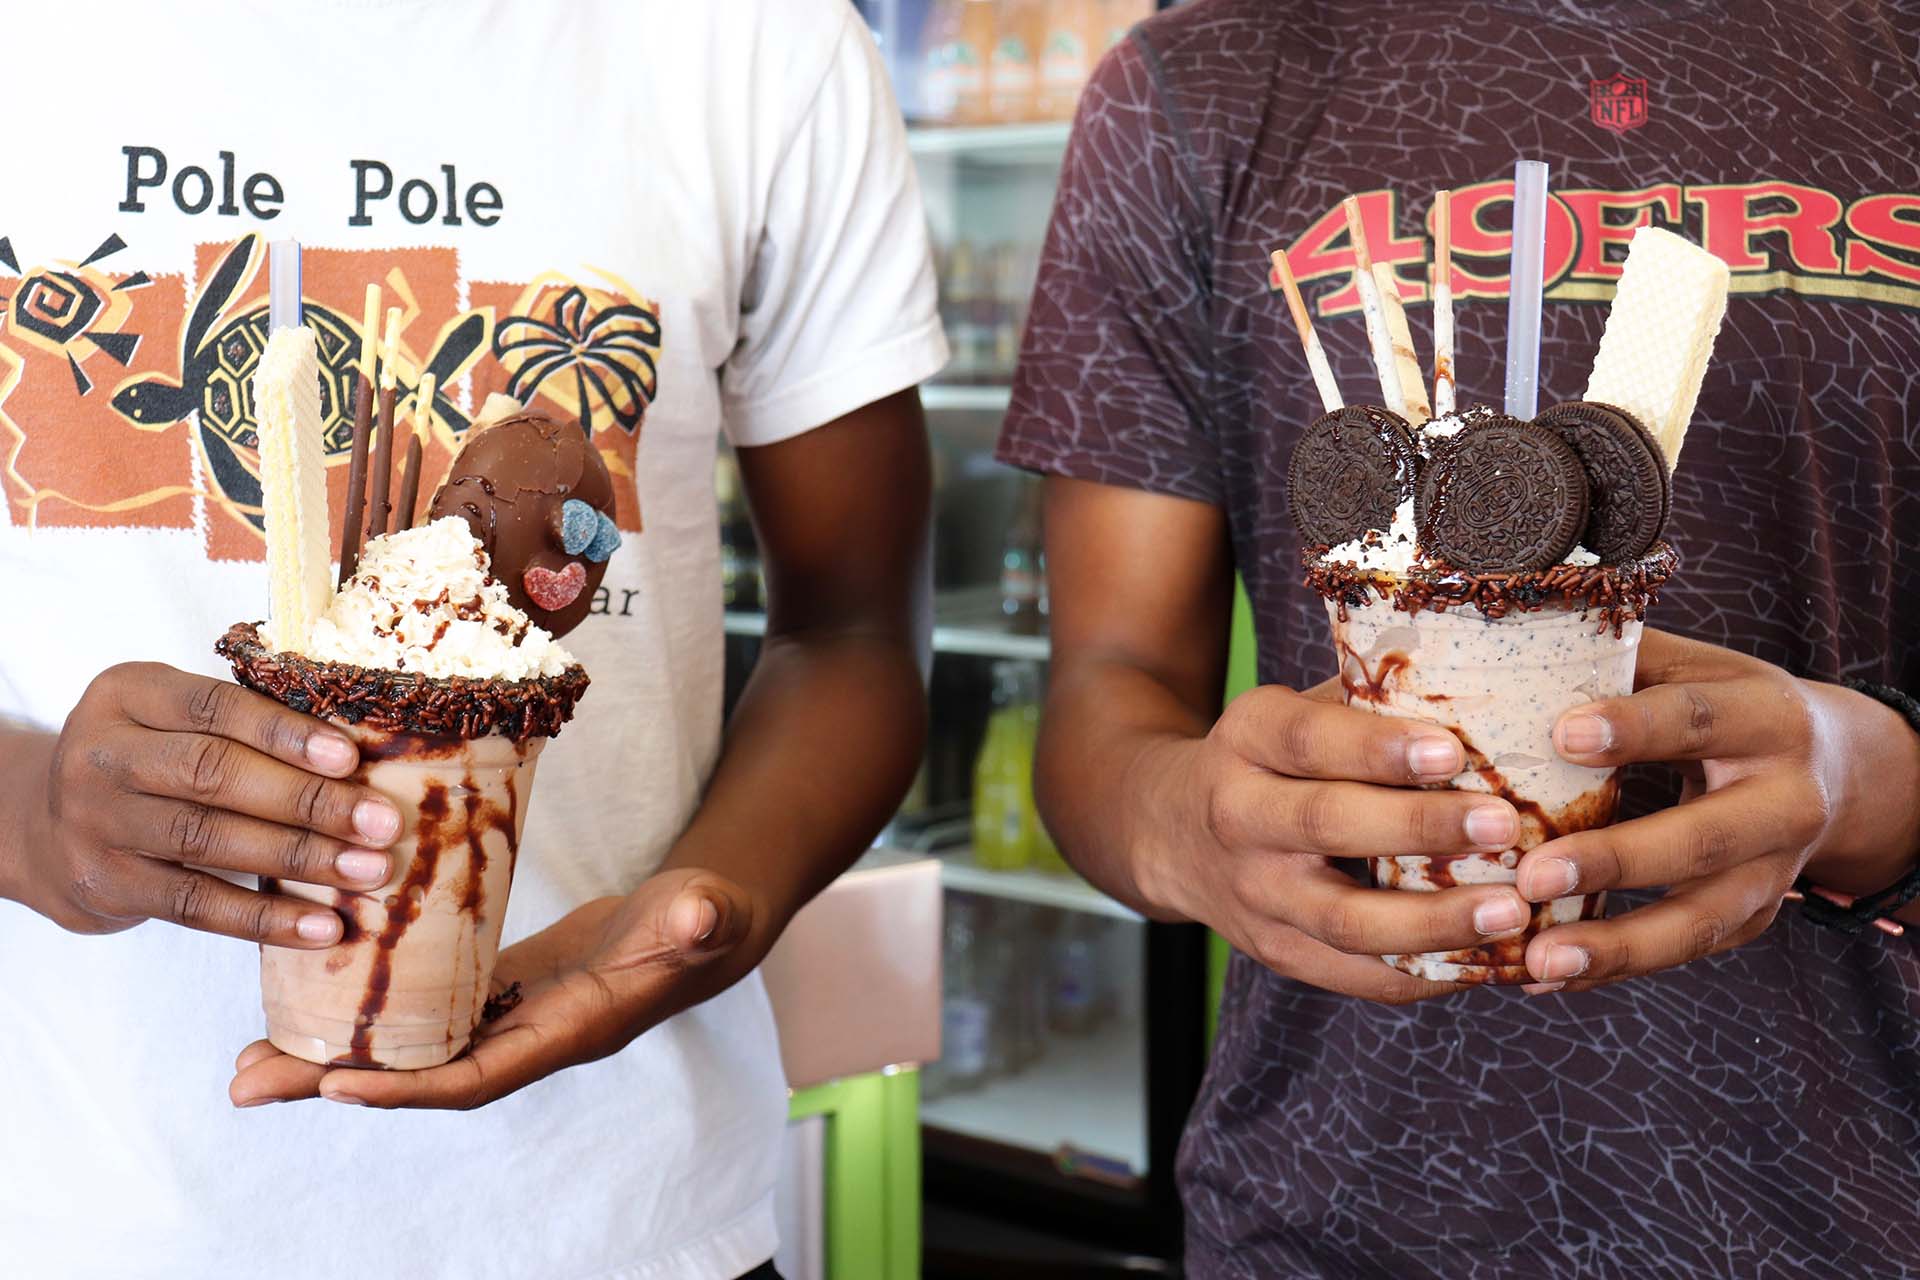 Two youngsters show off milkshakes loaded with sweet toppings.